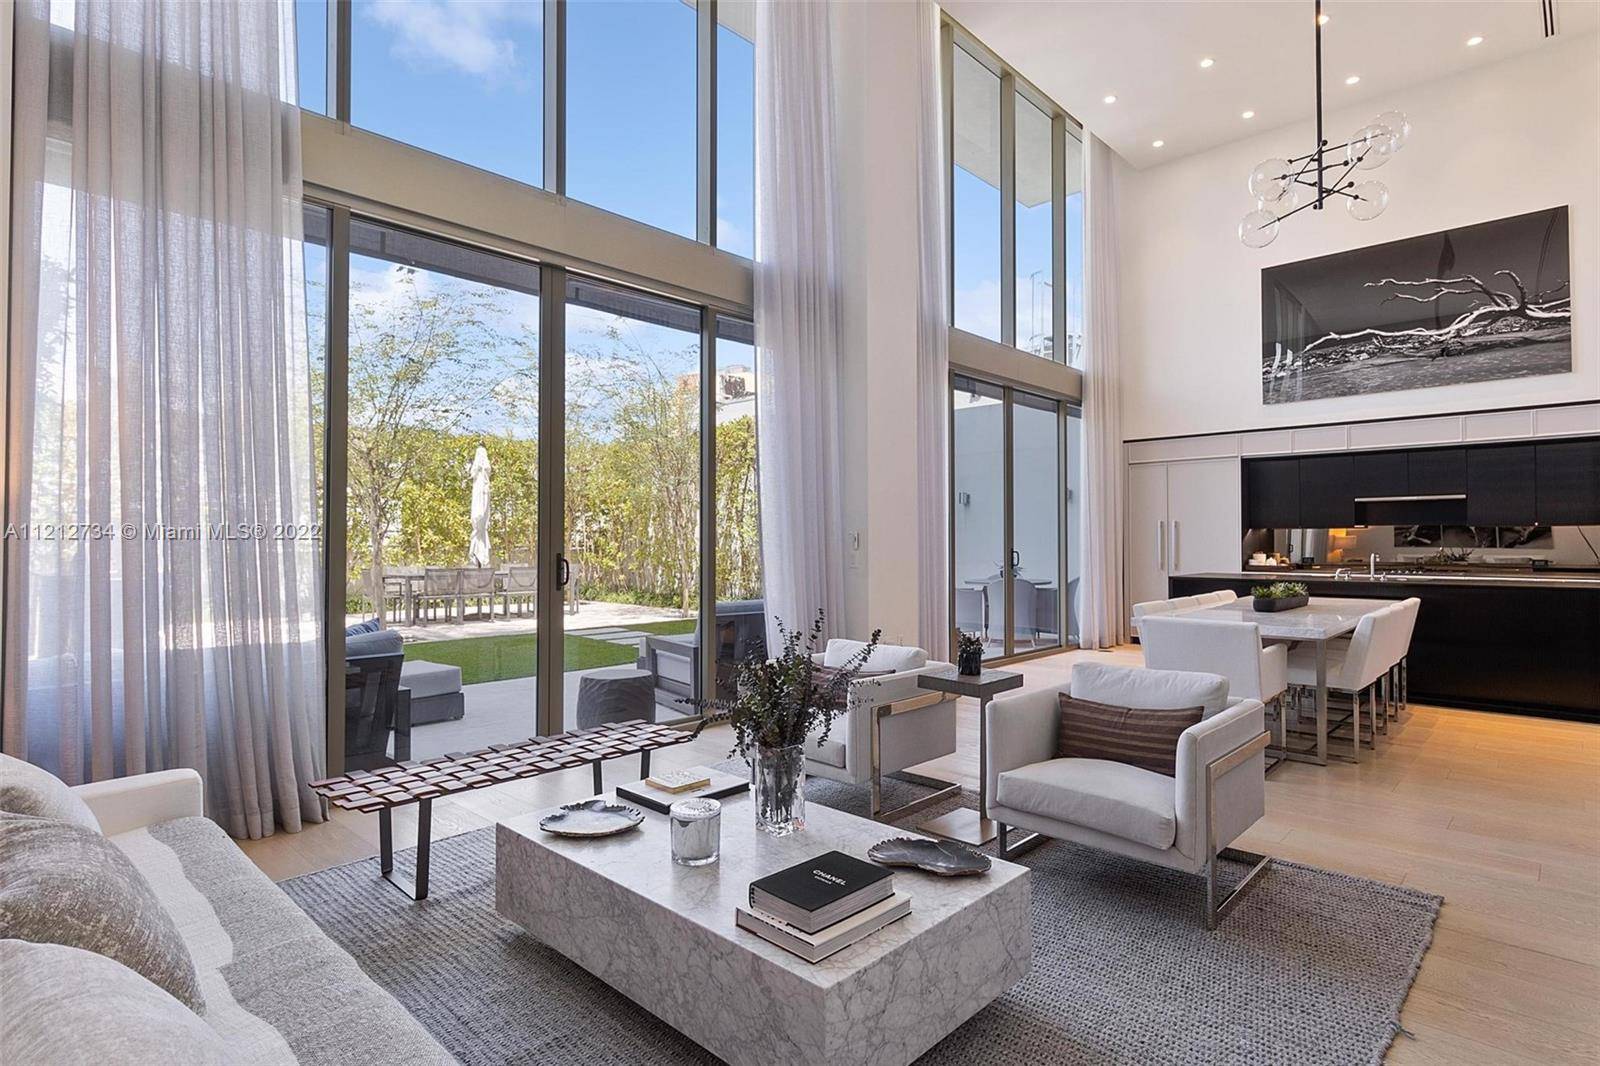 A unique townhouse with stunning finishes by world renowned designer Thomas Juul Hansen.